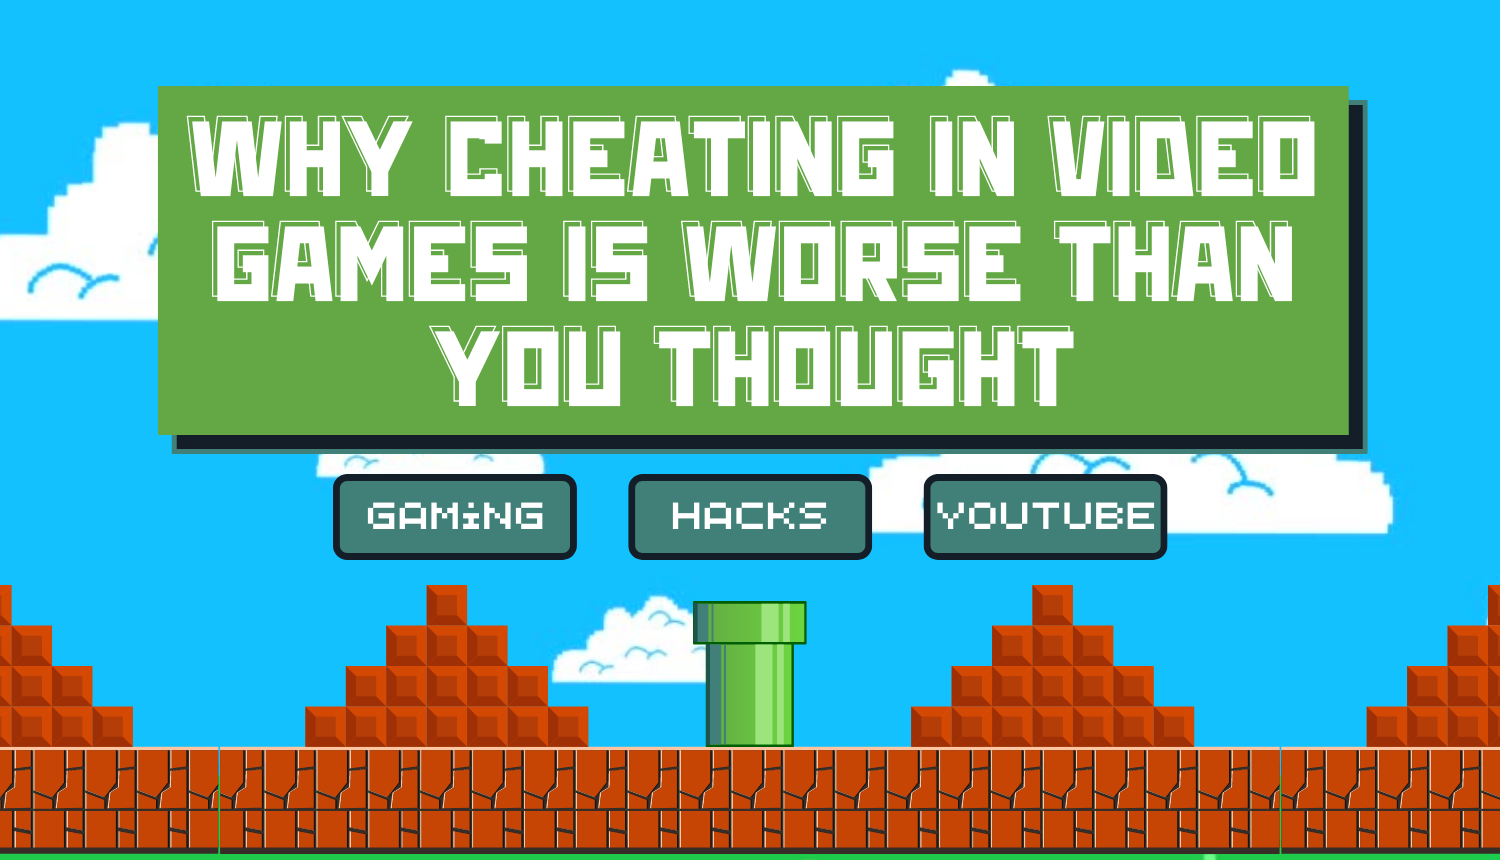 https://www.pluggedin.com/wp-content/uploads/2022/11/why-cheating-in-video-games-is-worse-than-you-thought.png